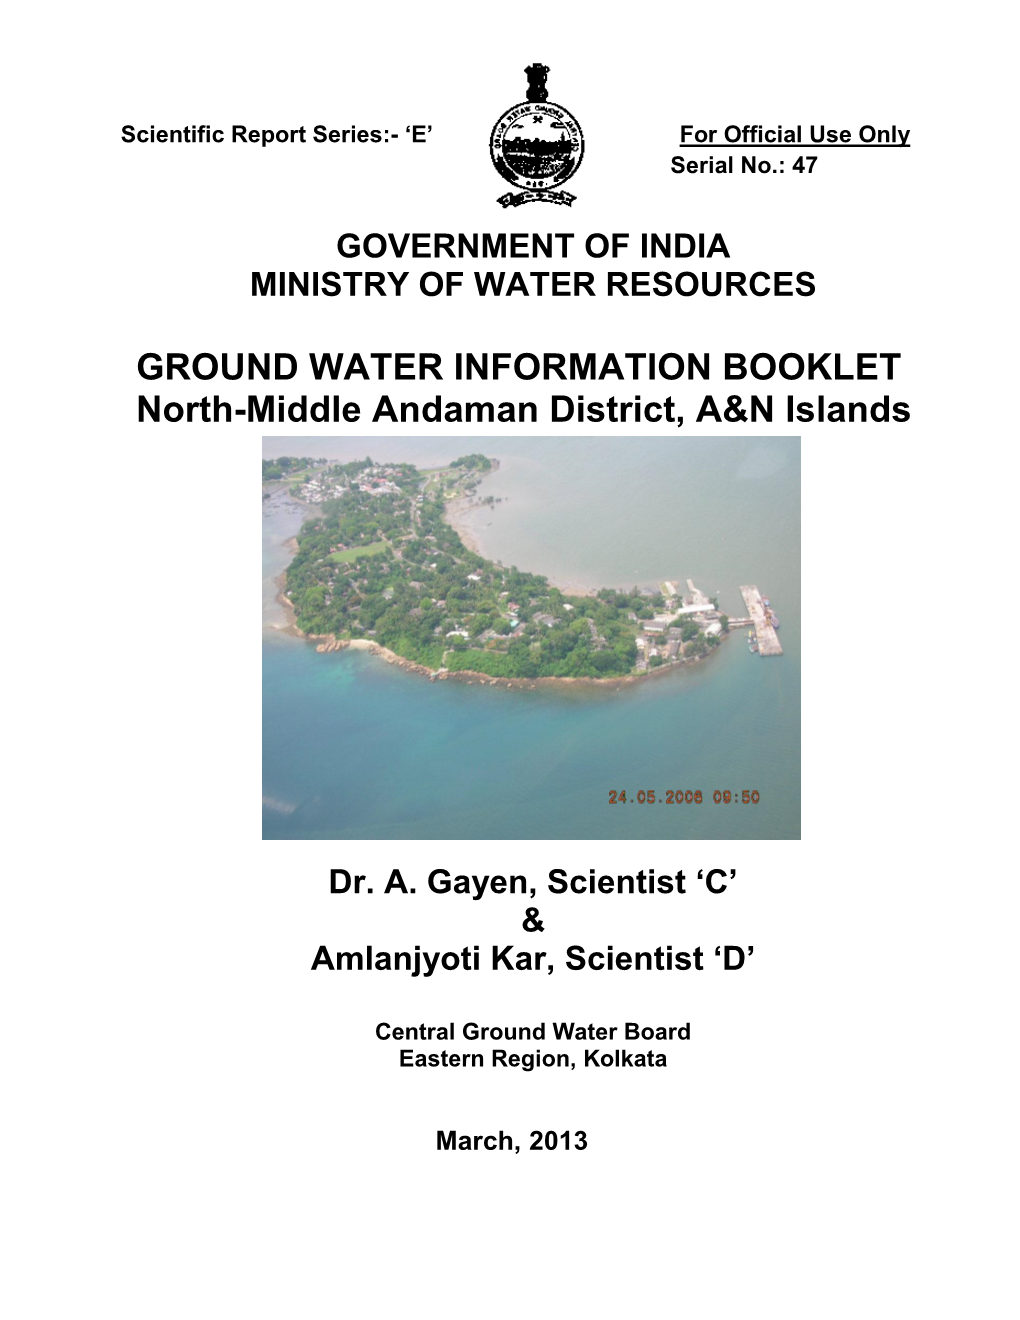 GROUND WATER INFORMATION BOOKLET North-Middle Andaman District, A&N Islands